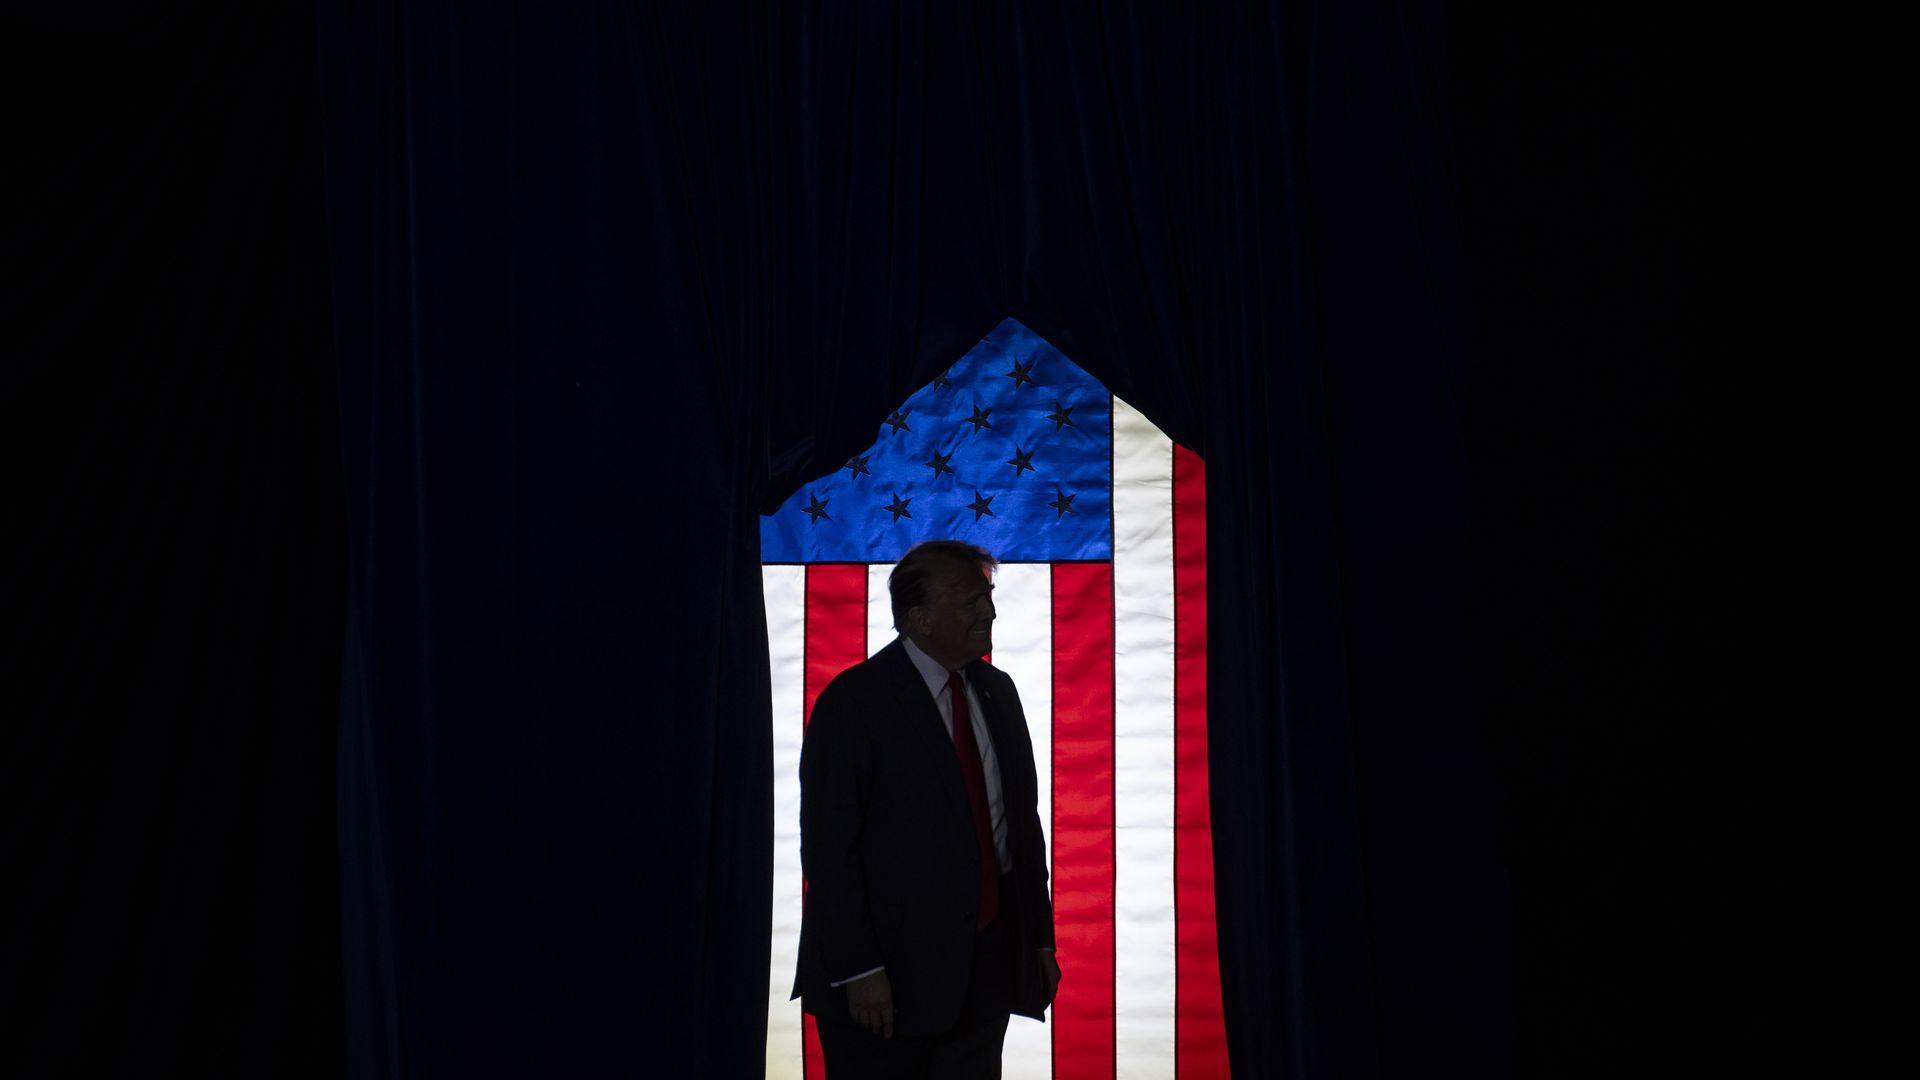 Former President Trump is shown in silhouette in front of a U.S. flag.